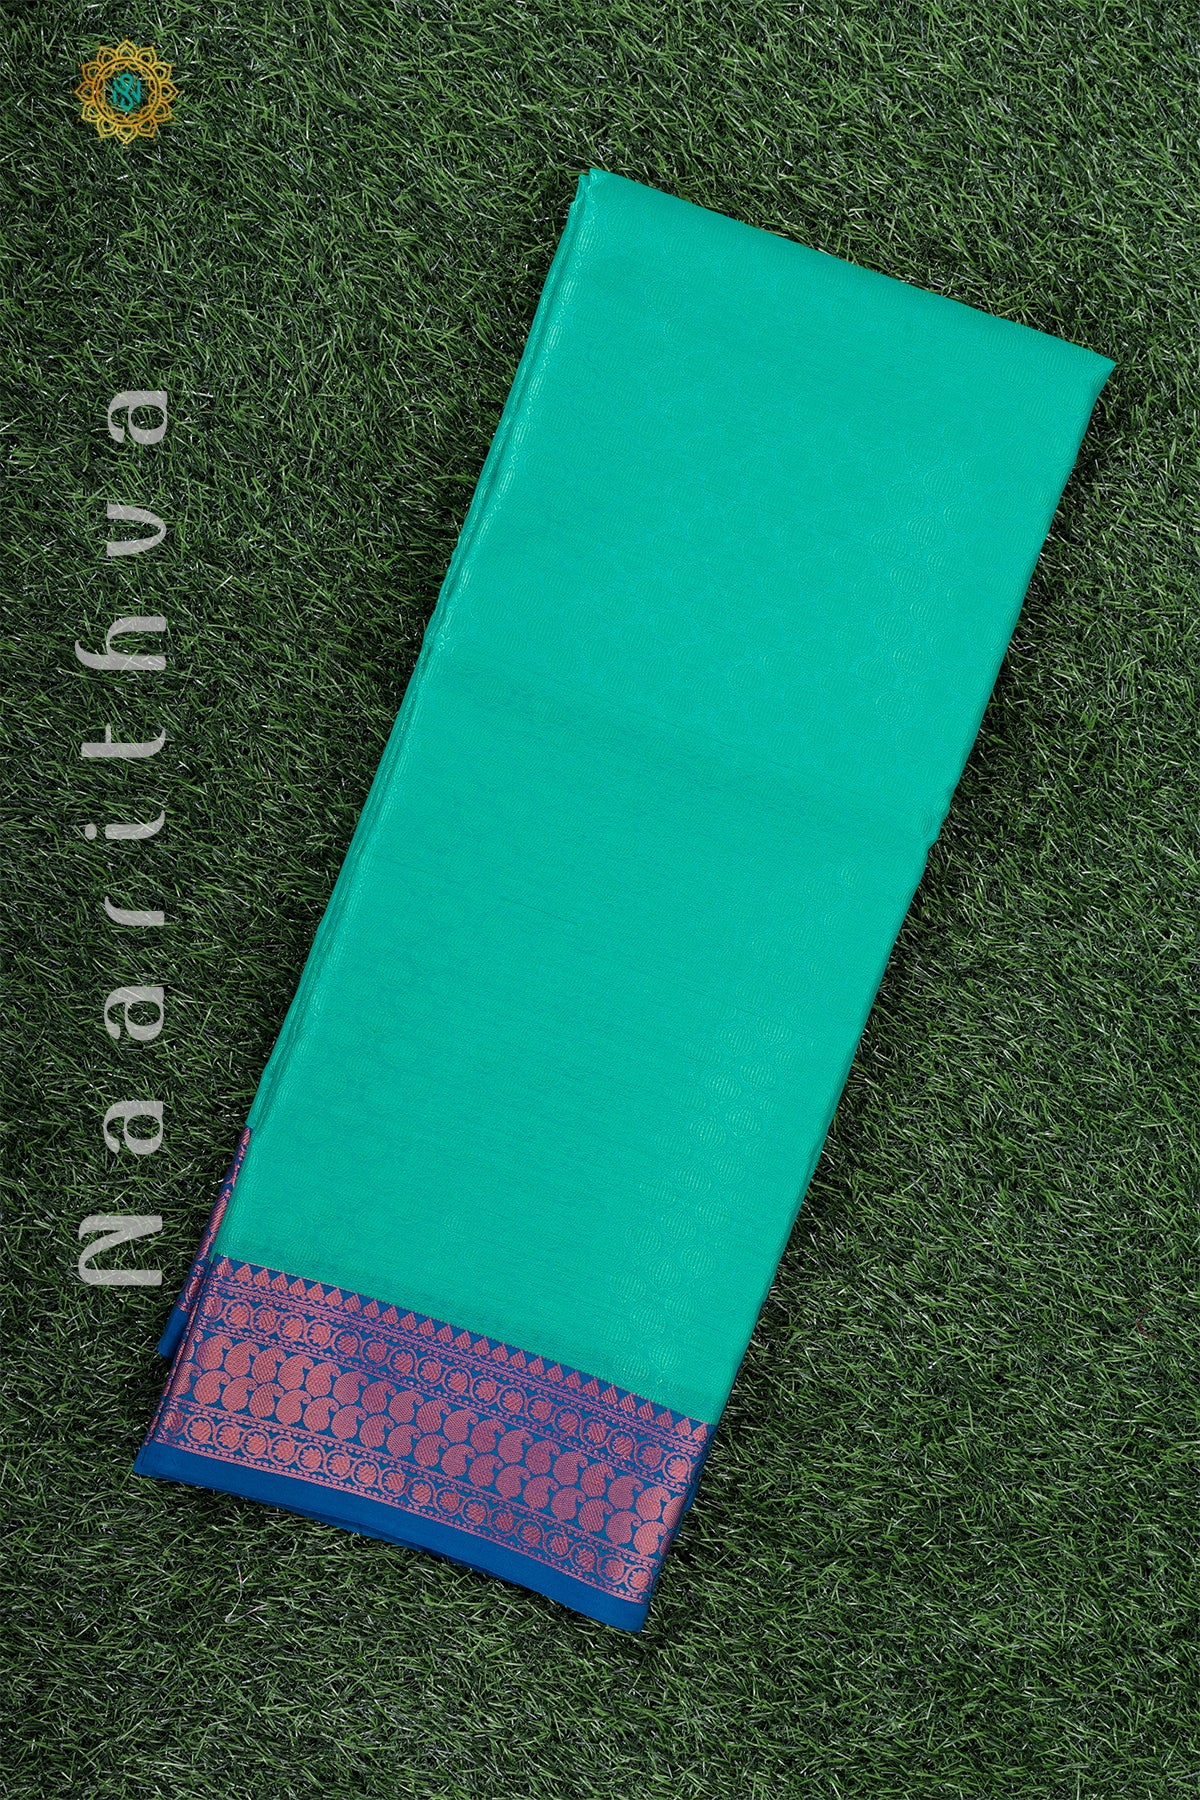 CYAN GREEN WITH BLUE - KORA TANCHOI SILK WITH CONTRAST BORDER